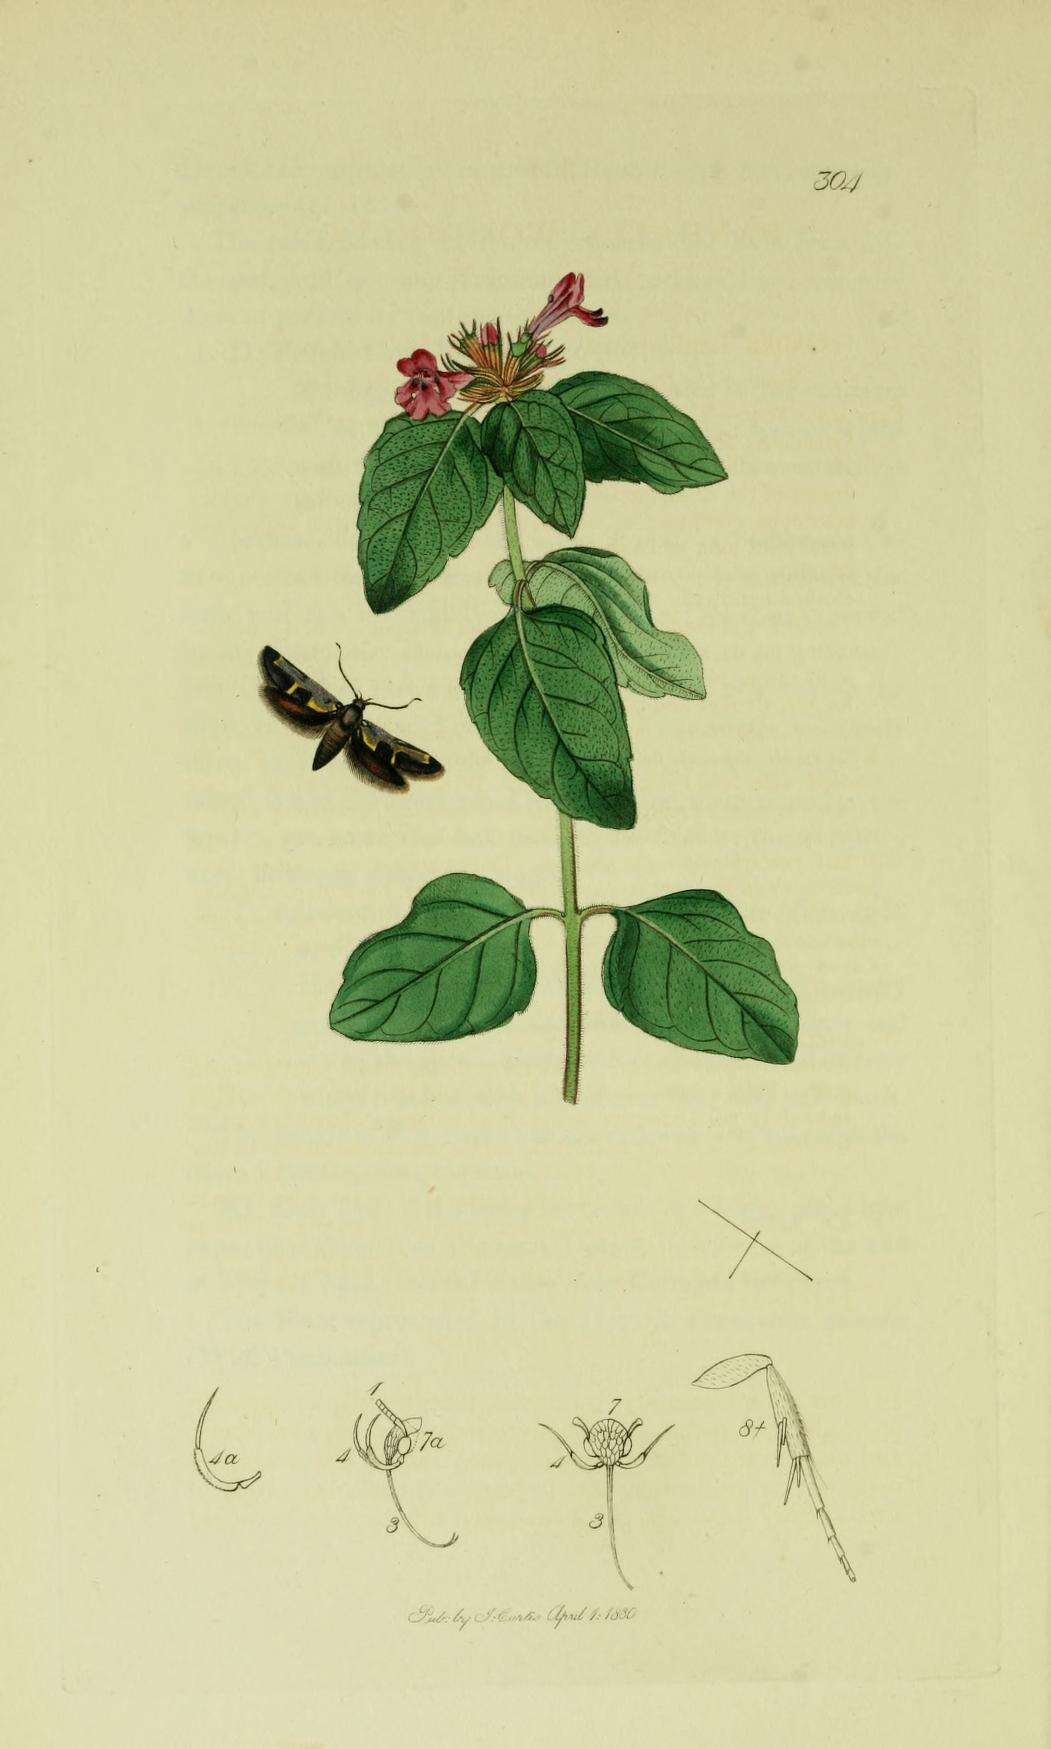 Image of Euclemensia woodiella Curtis 1831